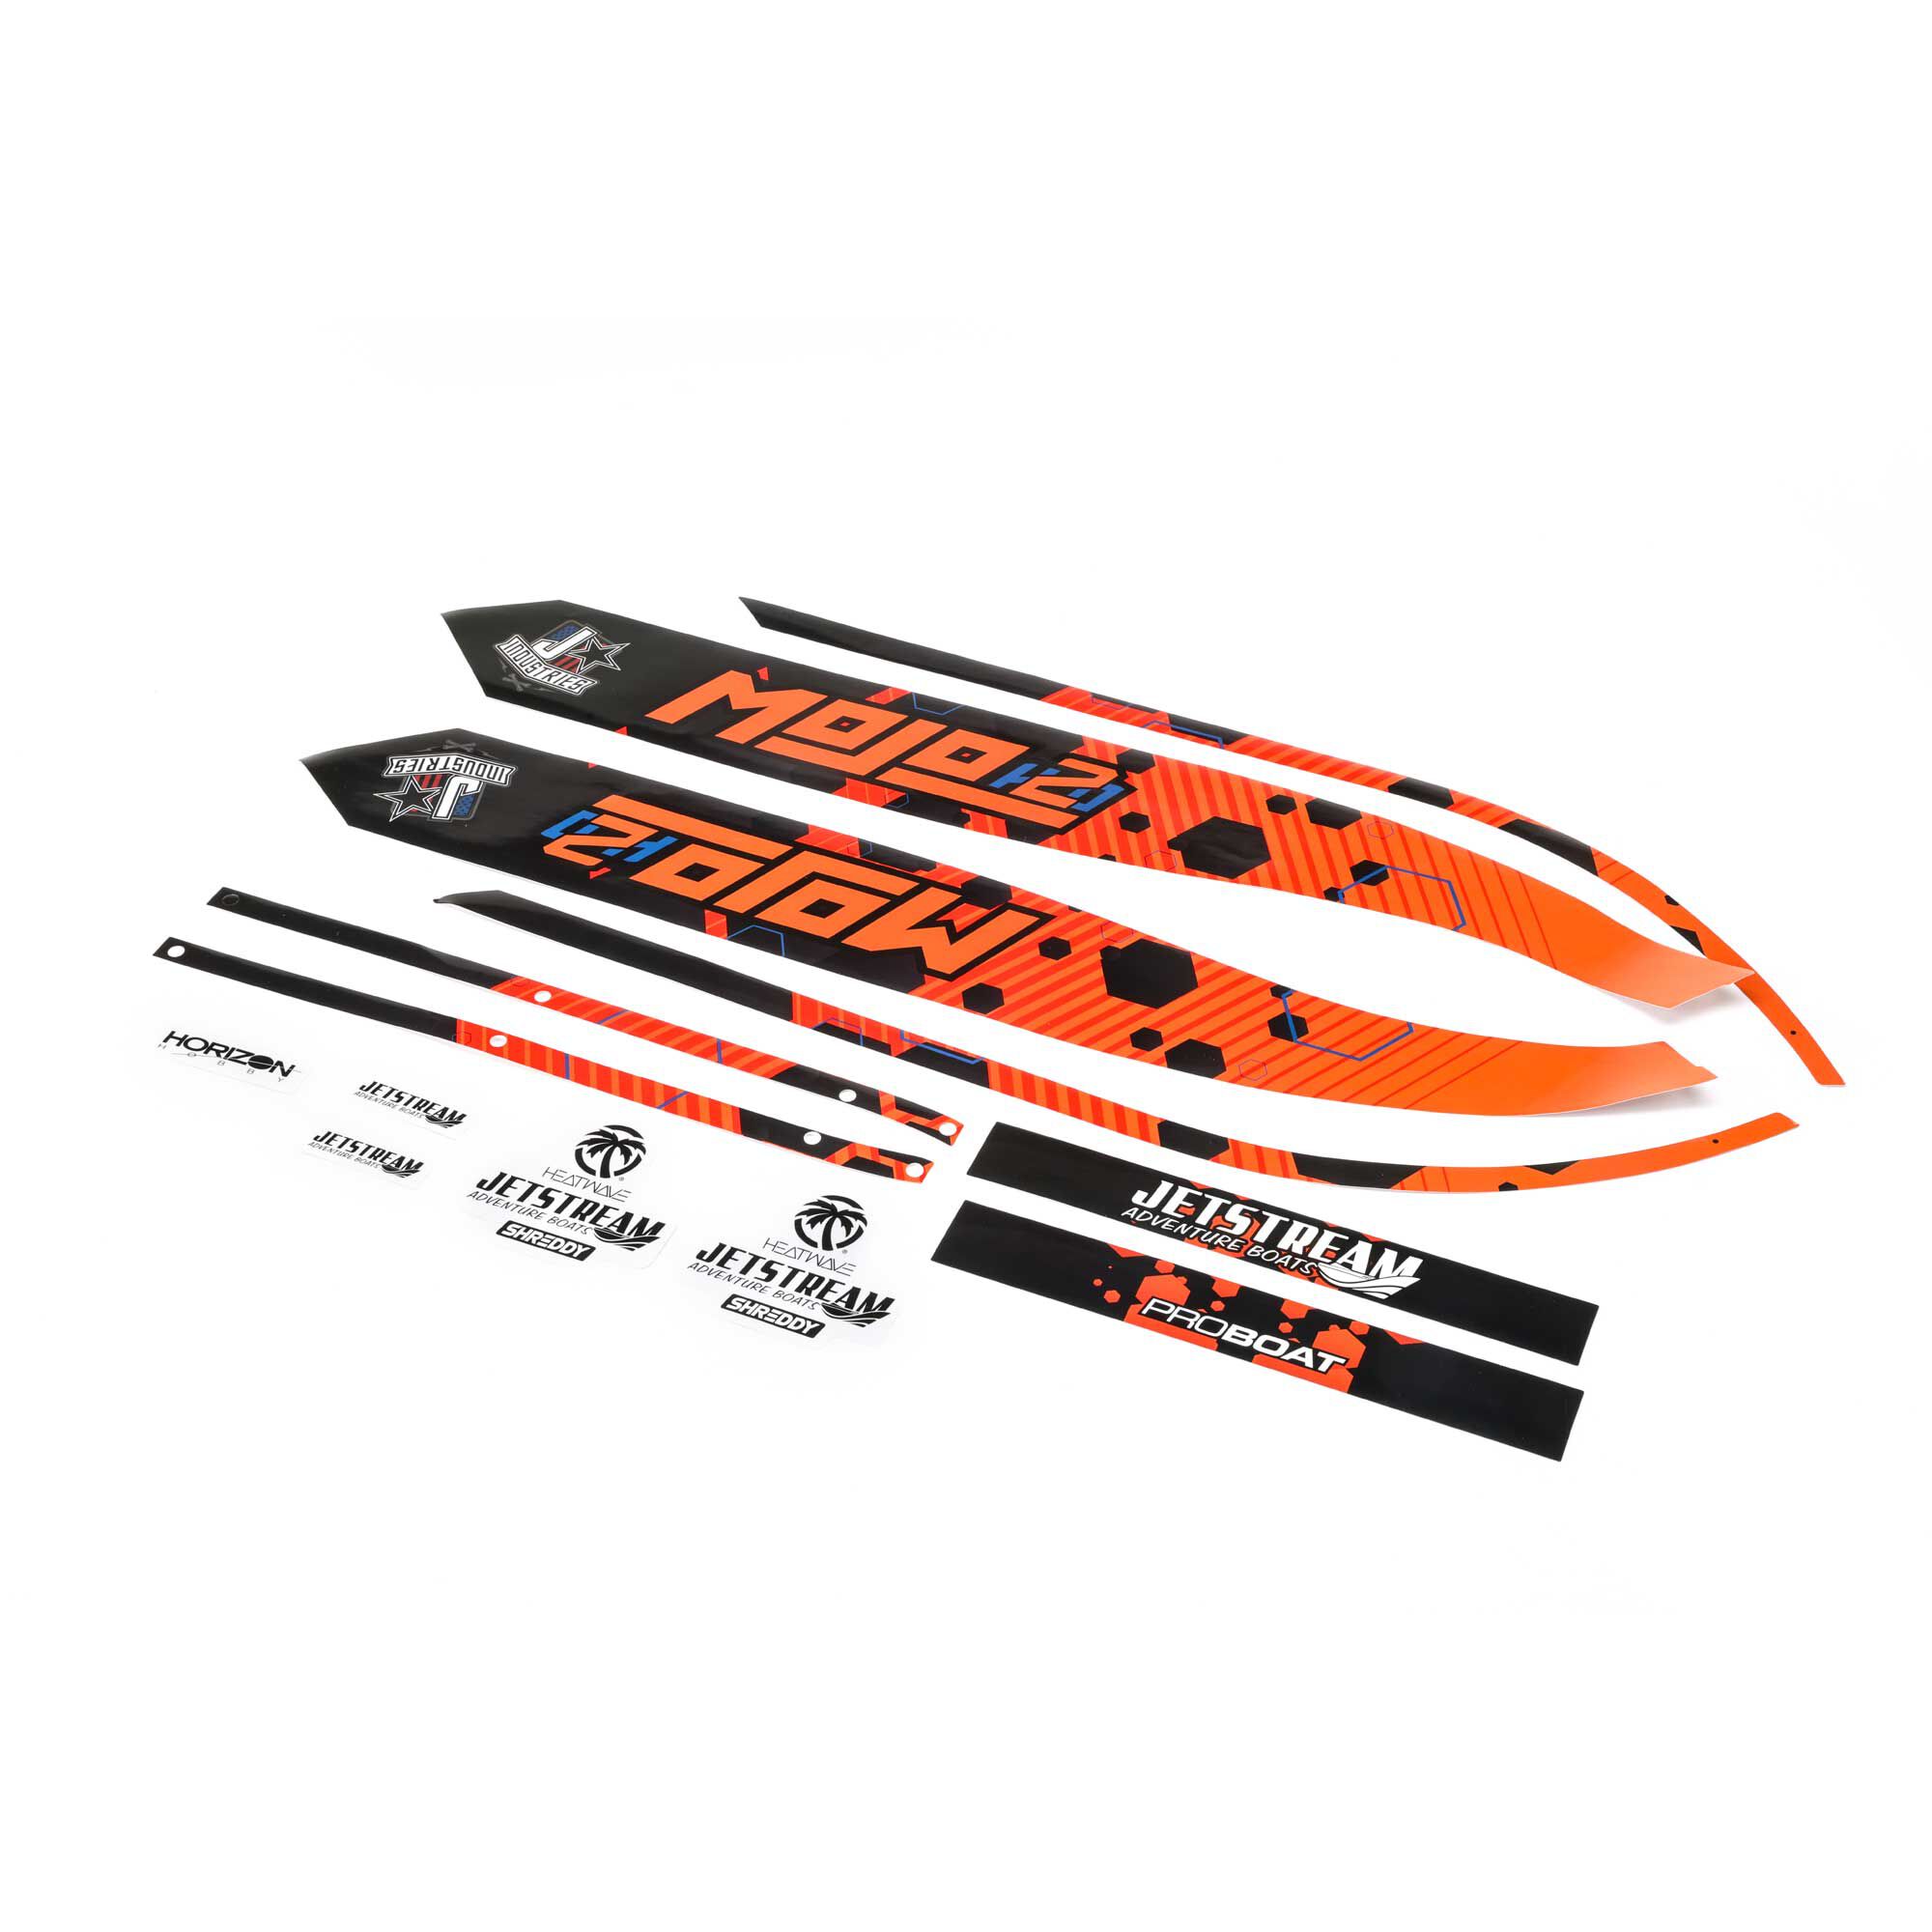 Pro Boat Replacement Parts | RC Boat Parts | Pro Boat